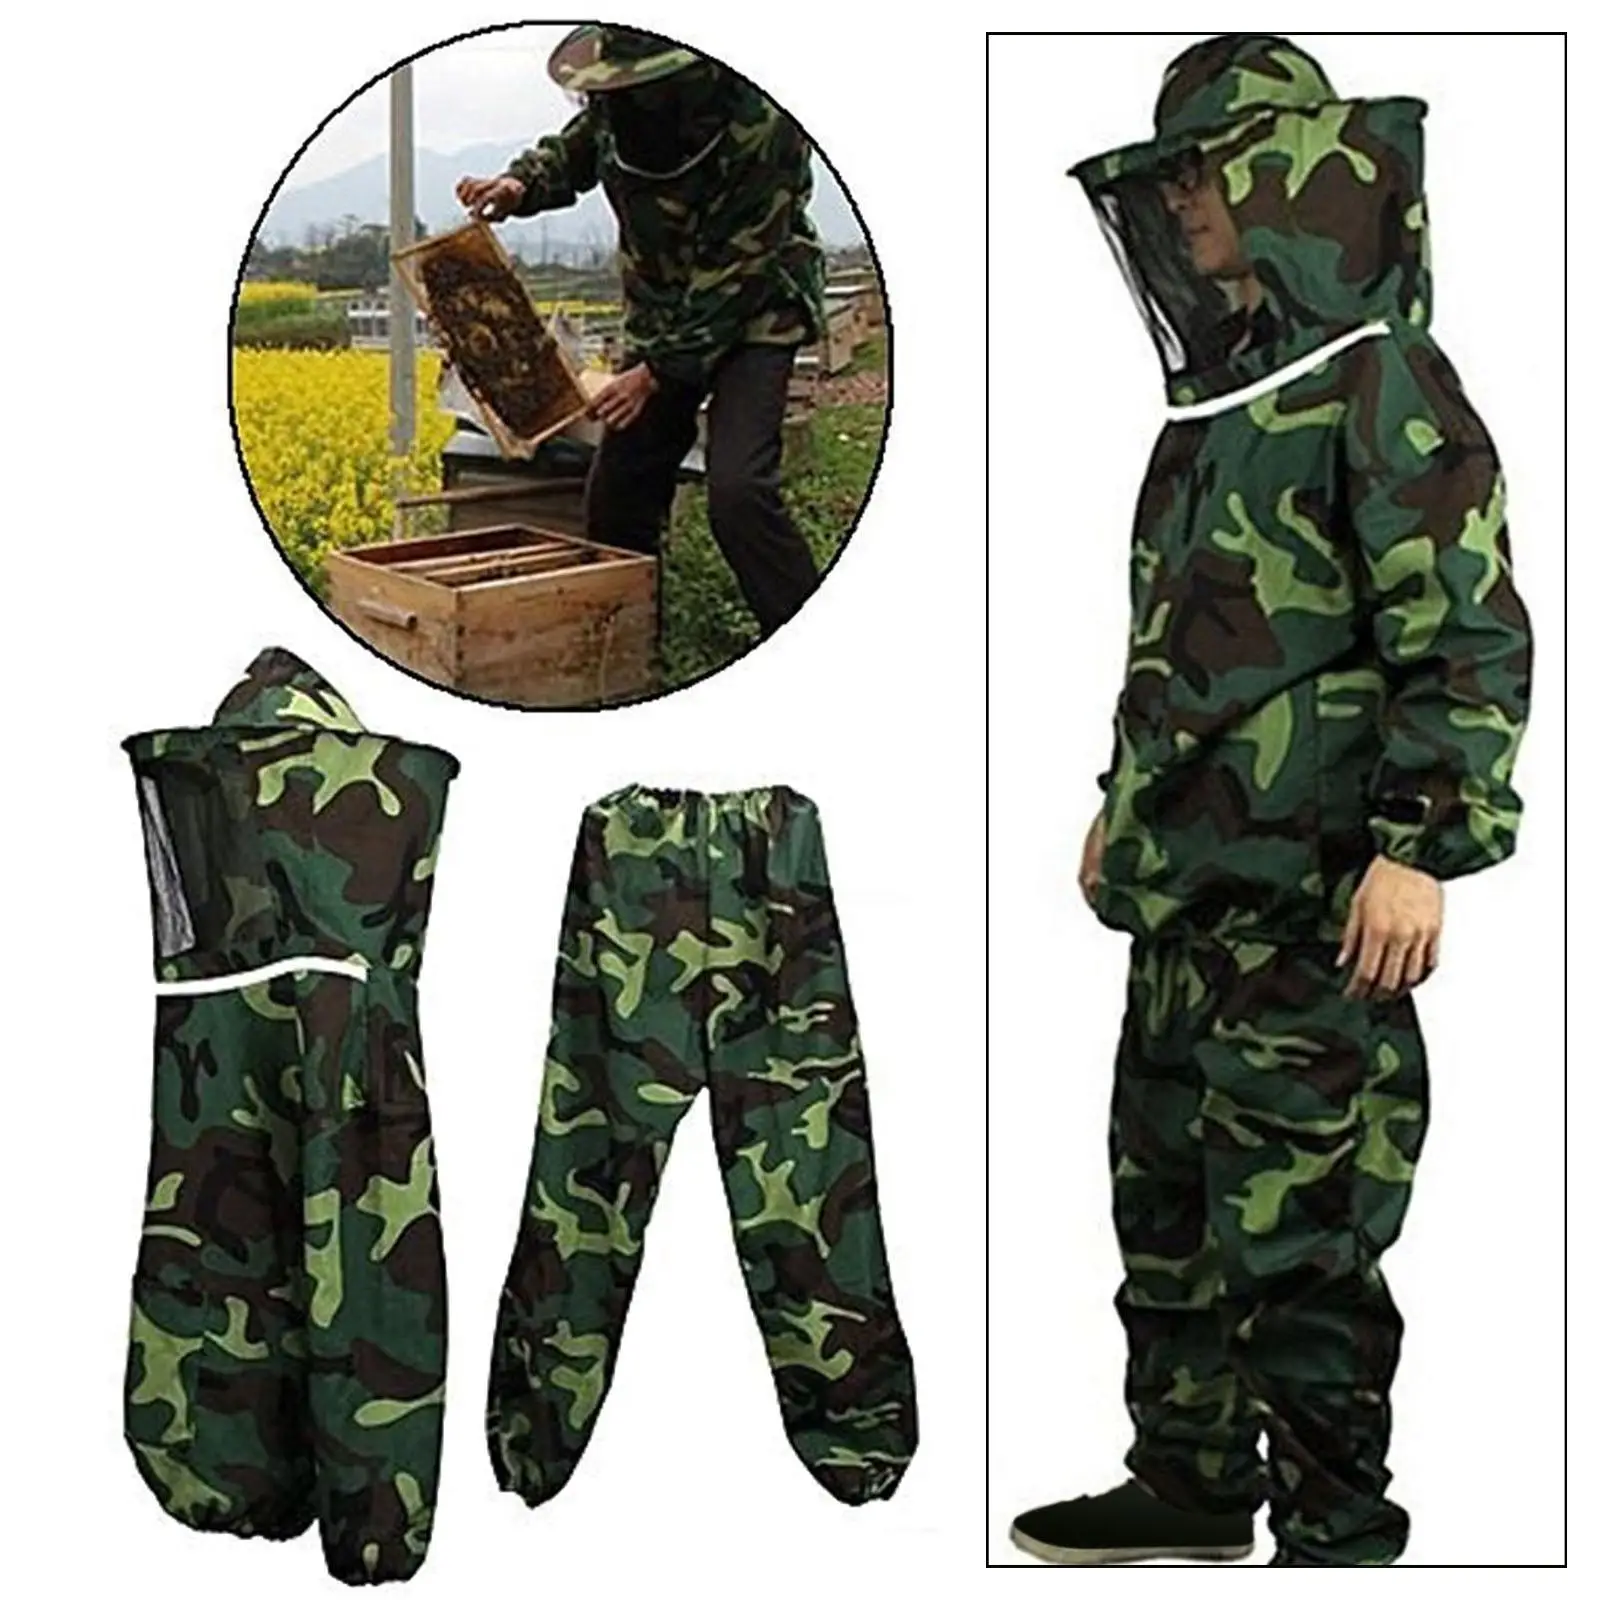 Unisex Beekeeping Suit for Professional Beekeeper and Beginner Breathable Beekeeper Outfit Beekeeping Jacket with Veil and Pants